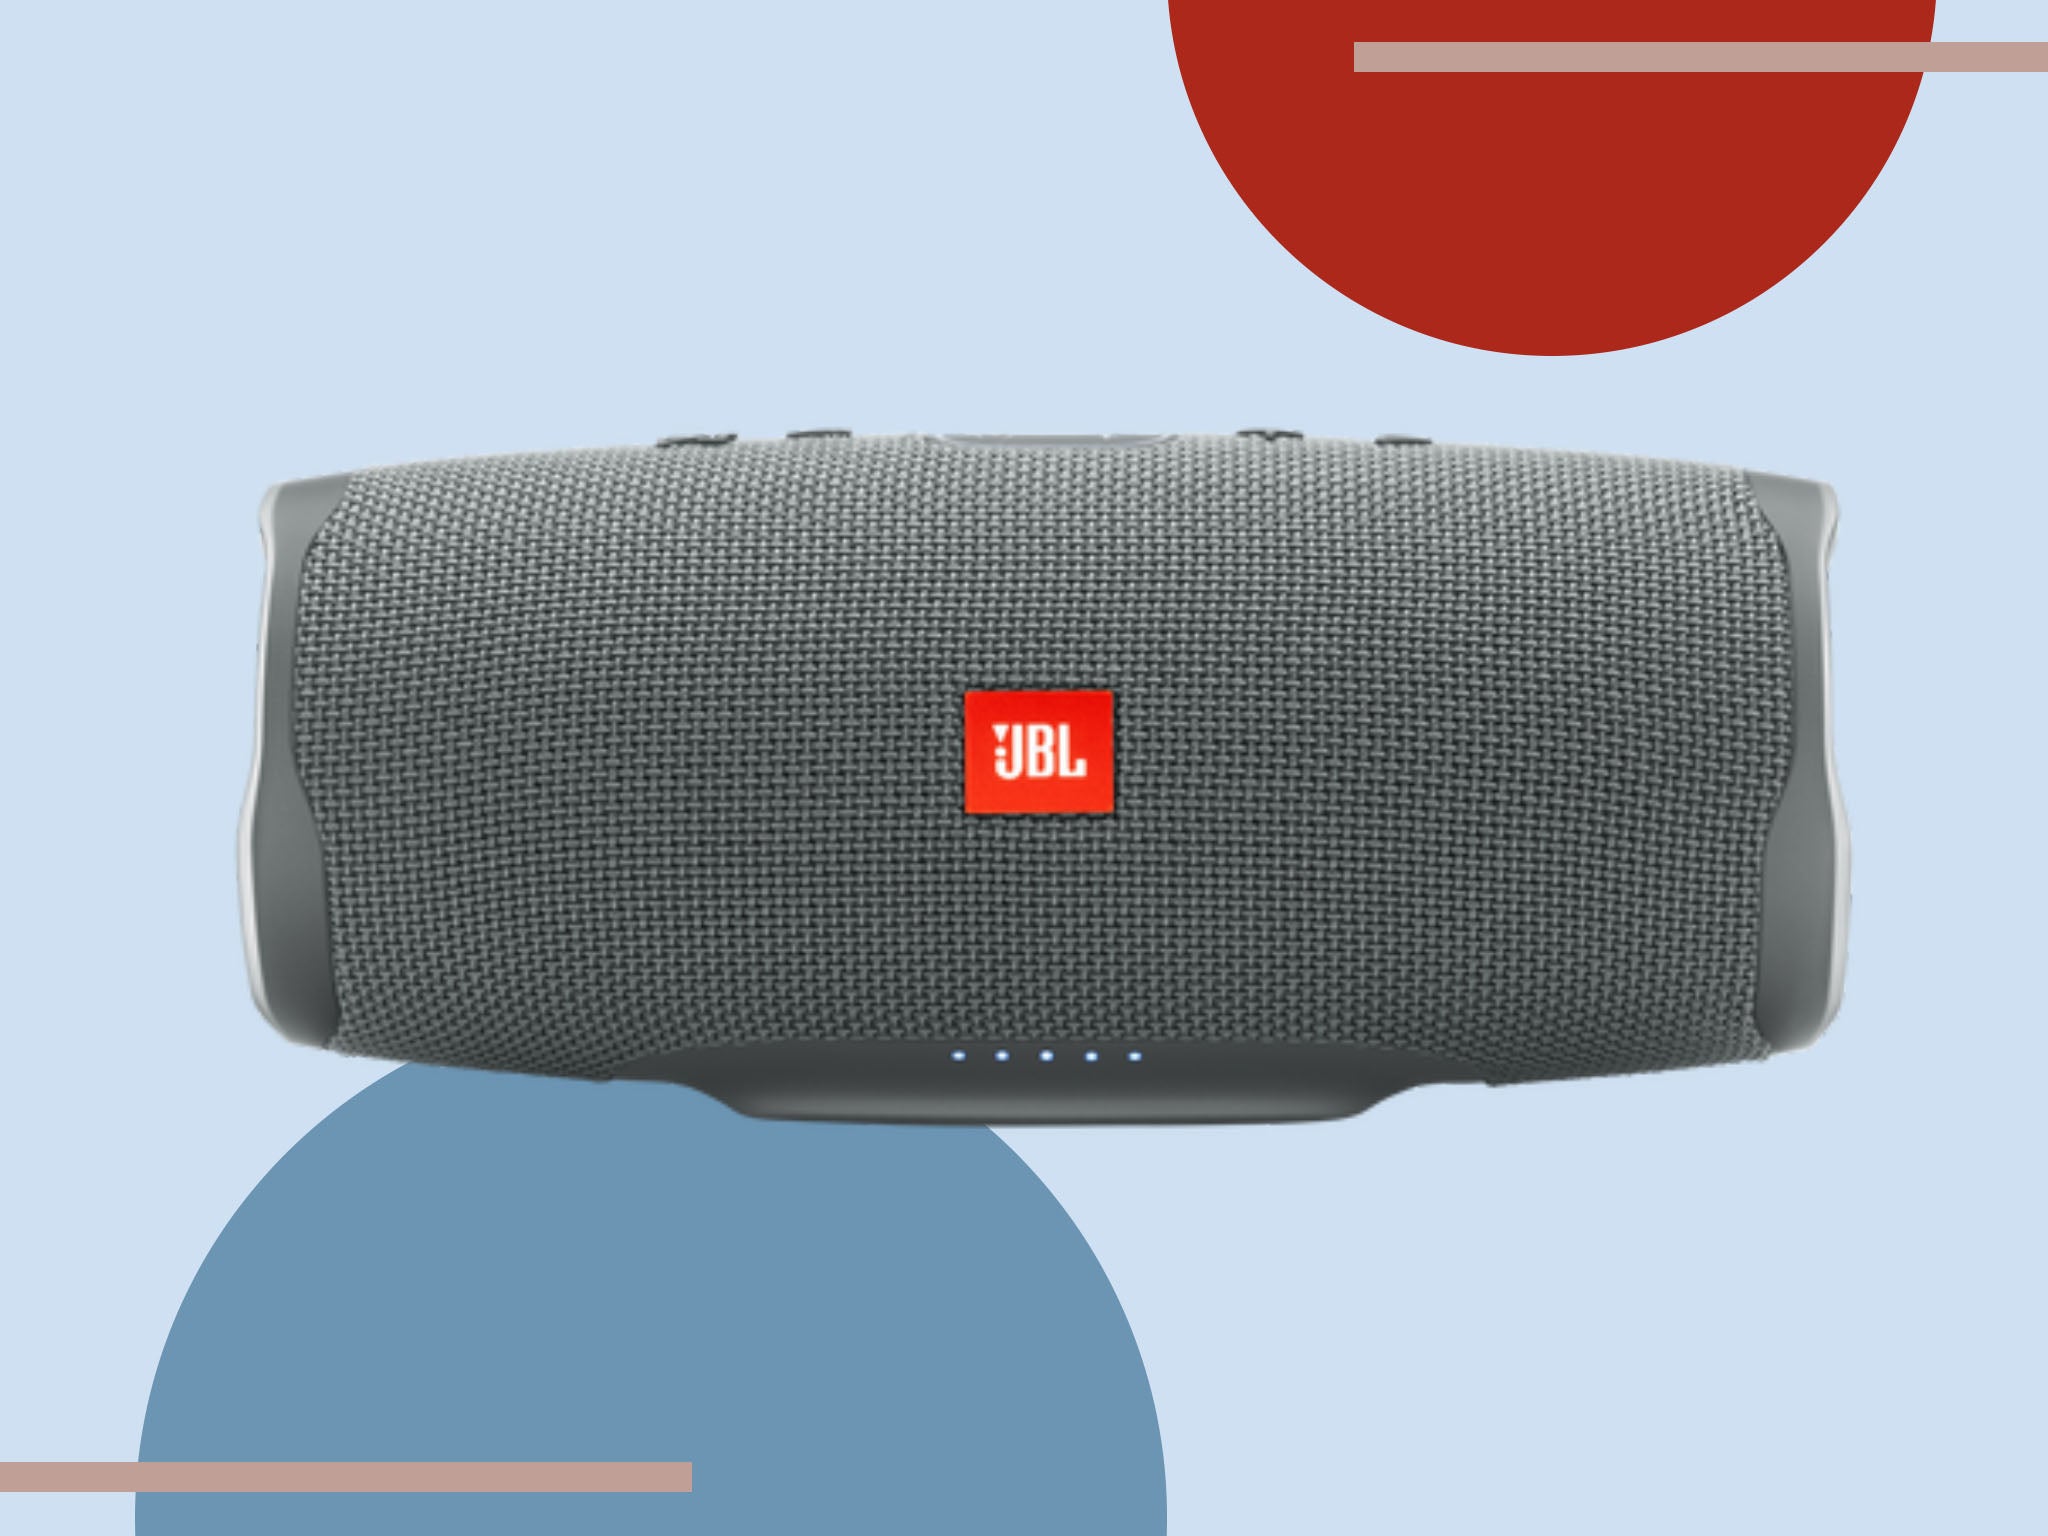 If you’re looking for a sturdy little unit that produces disproportionately big sound, JBL is usually a good jumping point